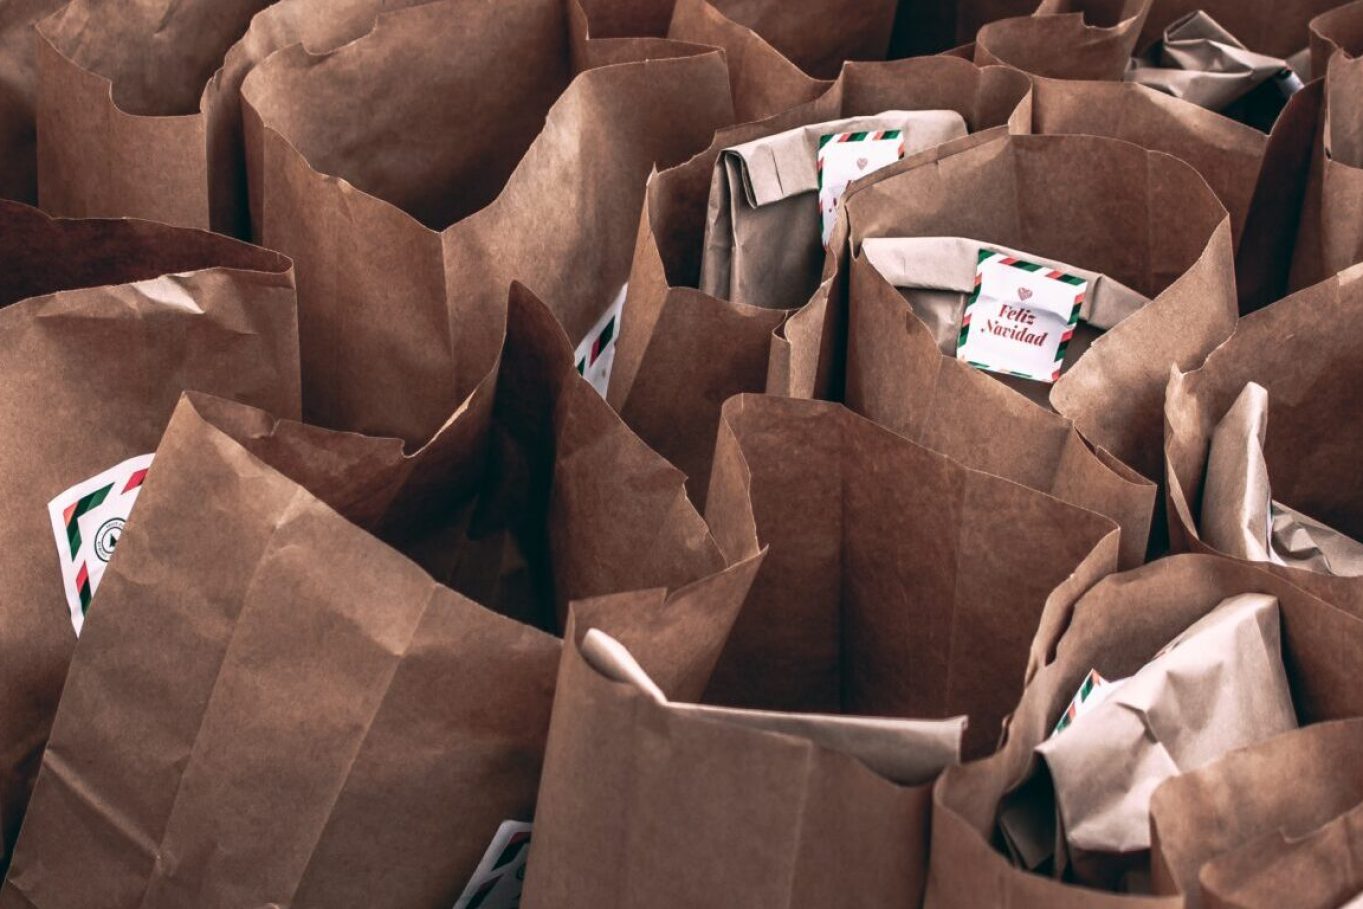 Paper bags filled with food at a food bank. Image by Claudia Raya on Unsplash.